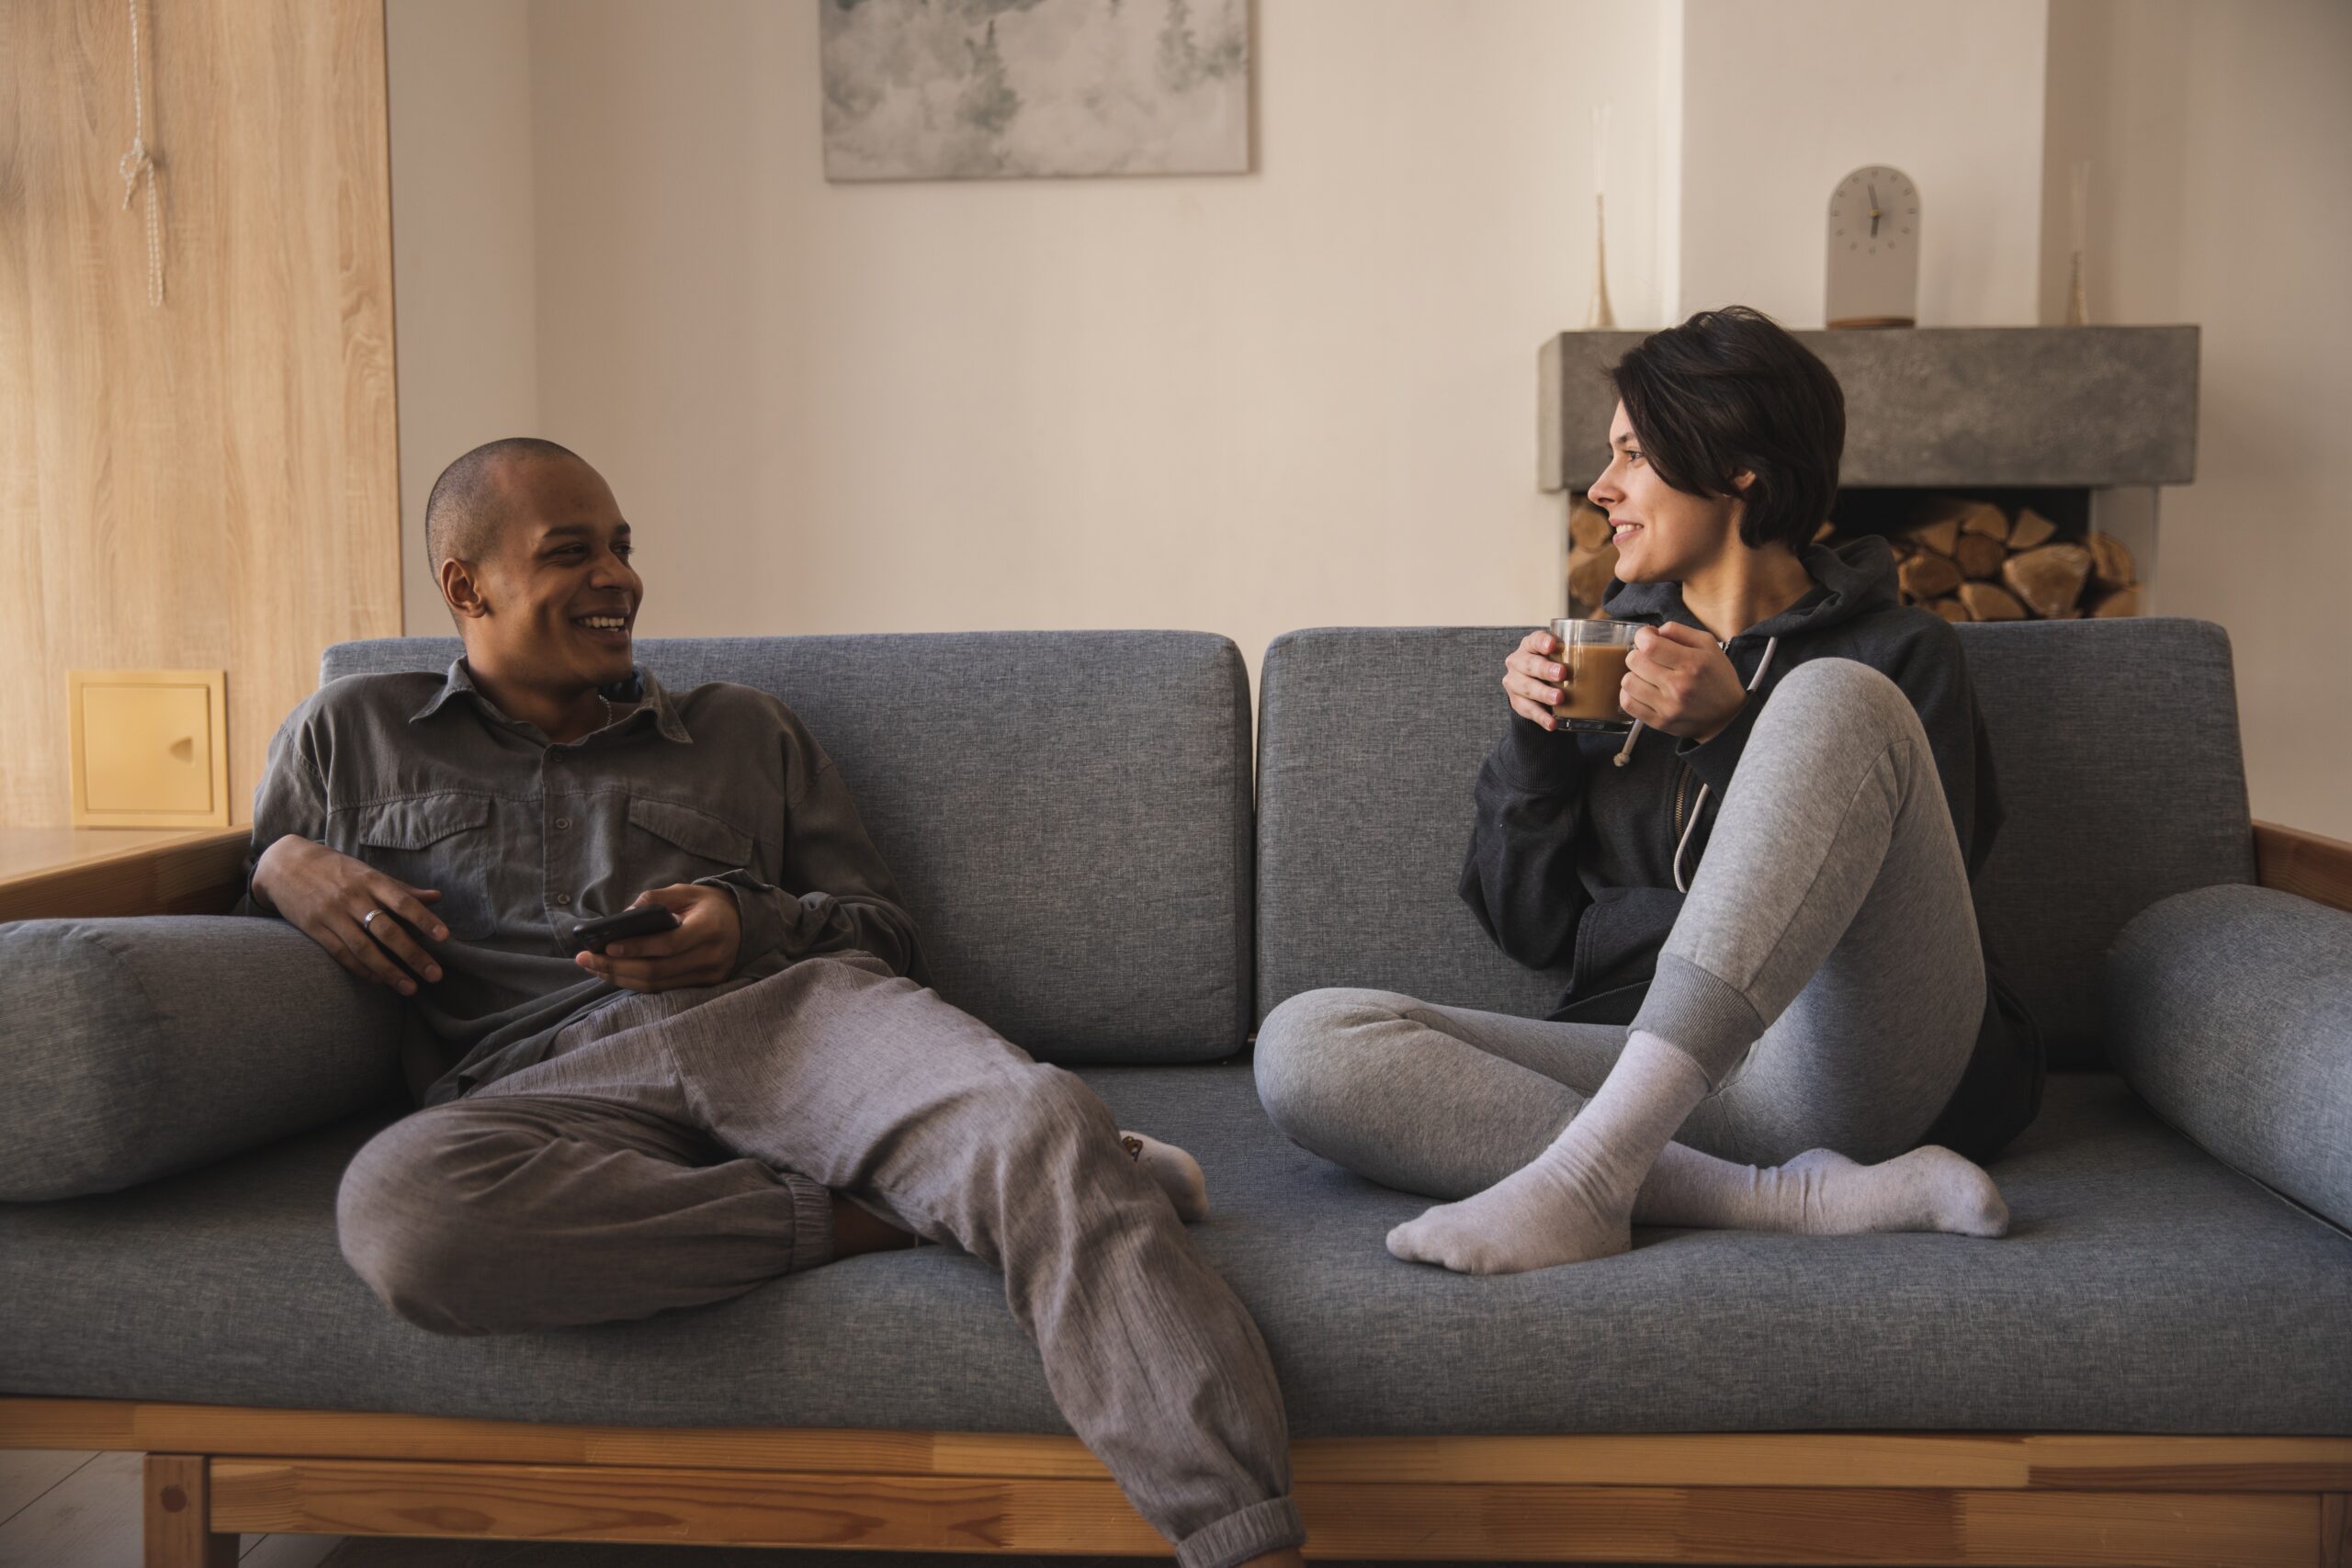 A couple sit on a couch and smile at each other. The man is holding a smartphone and the woman is holding a mug.